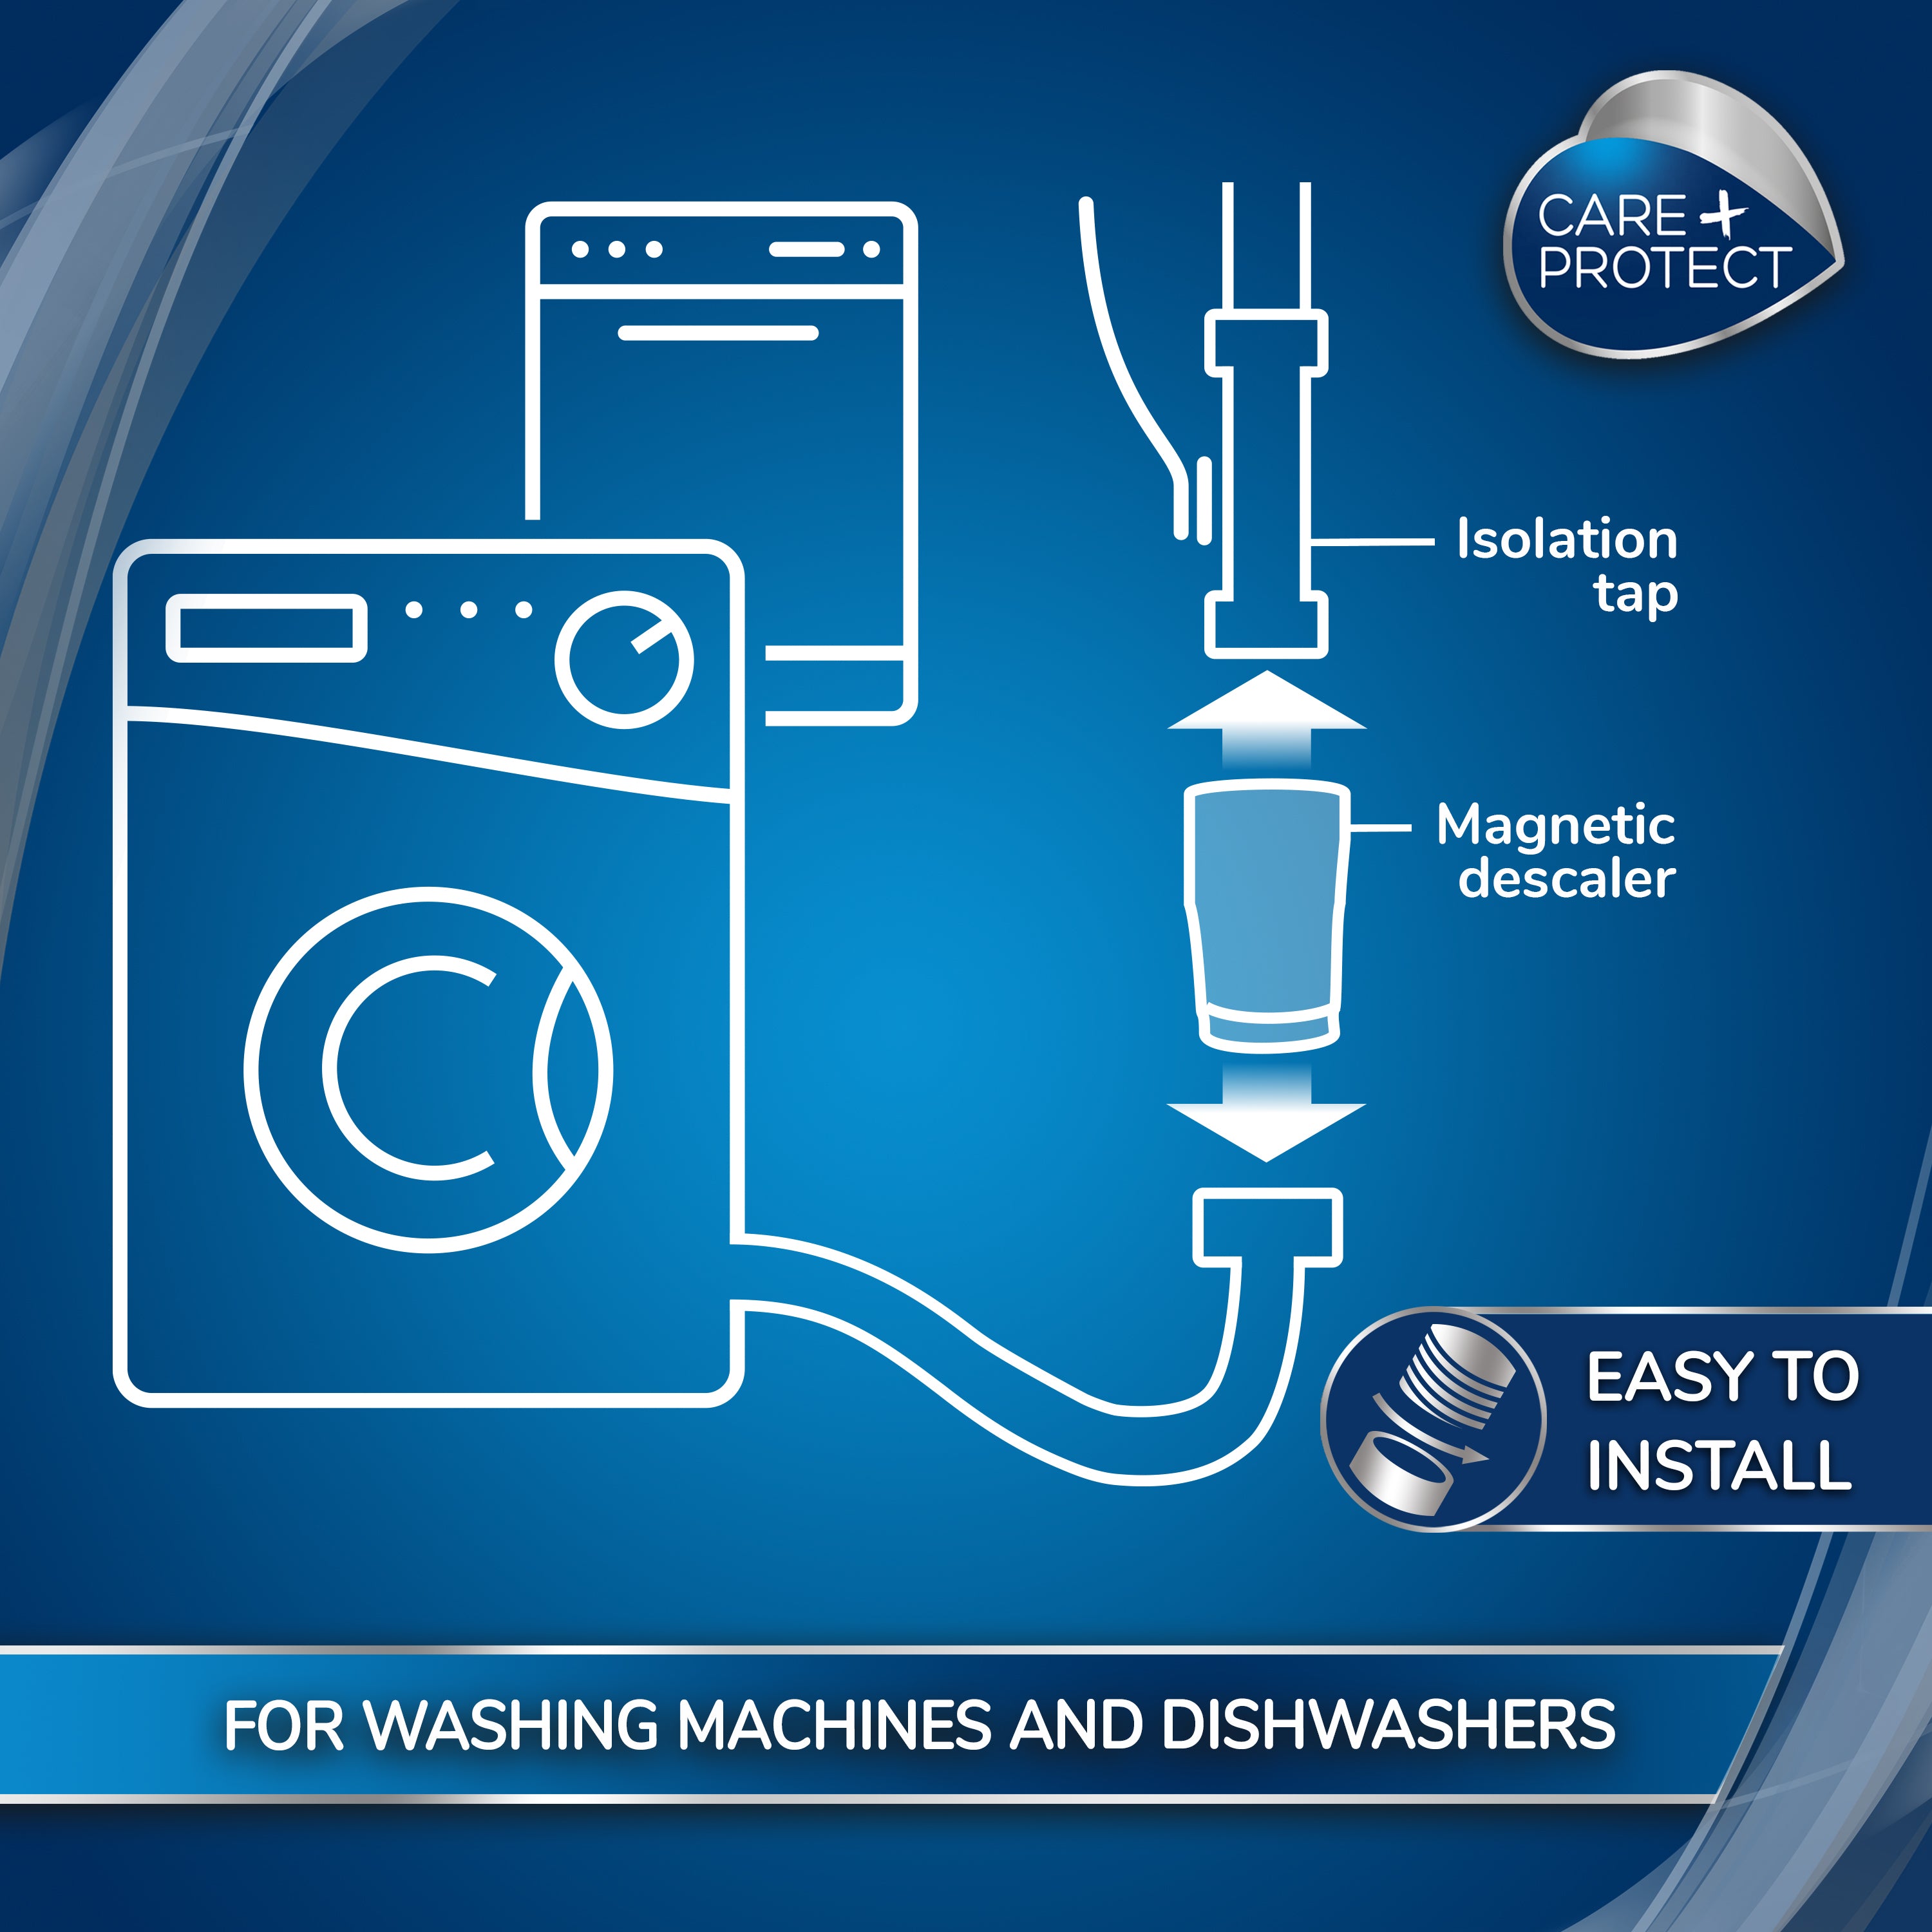 Magnetic Descaler for Washing Machine and Dishwasher